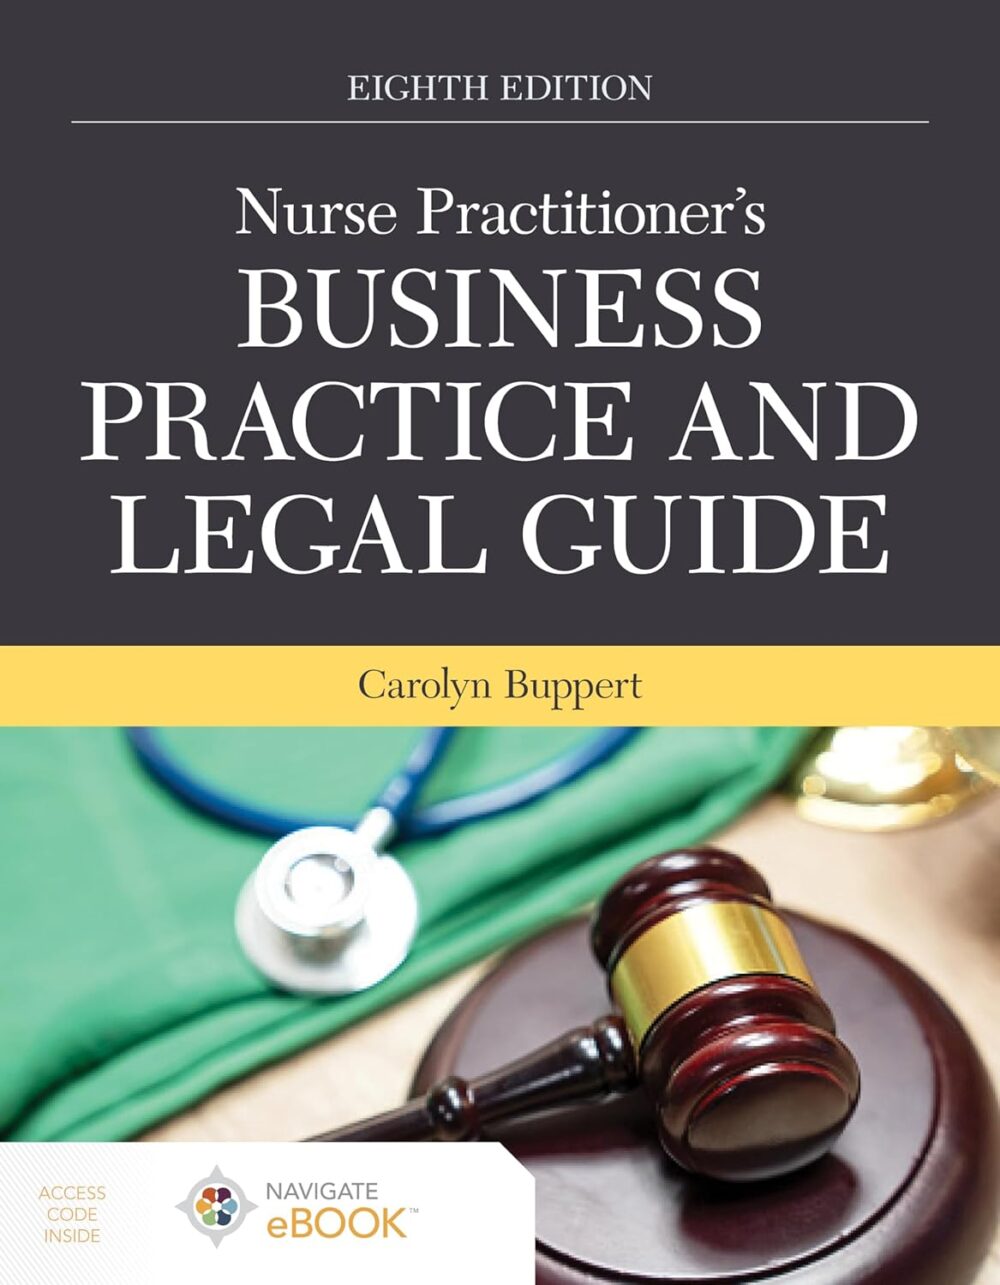 Nurse Practitioner’s Business Practice And Legal Guide 8th Edition